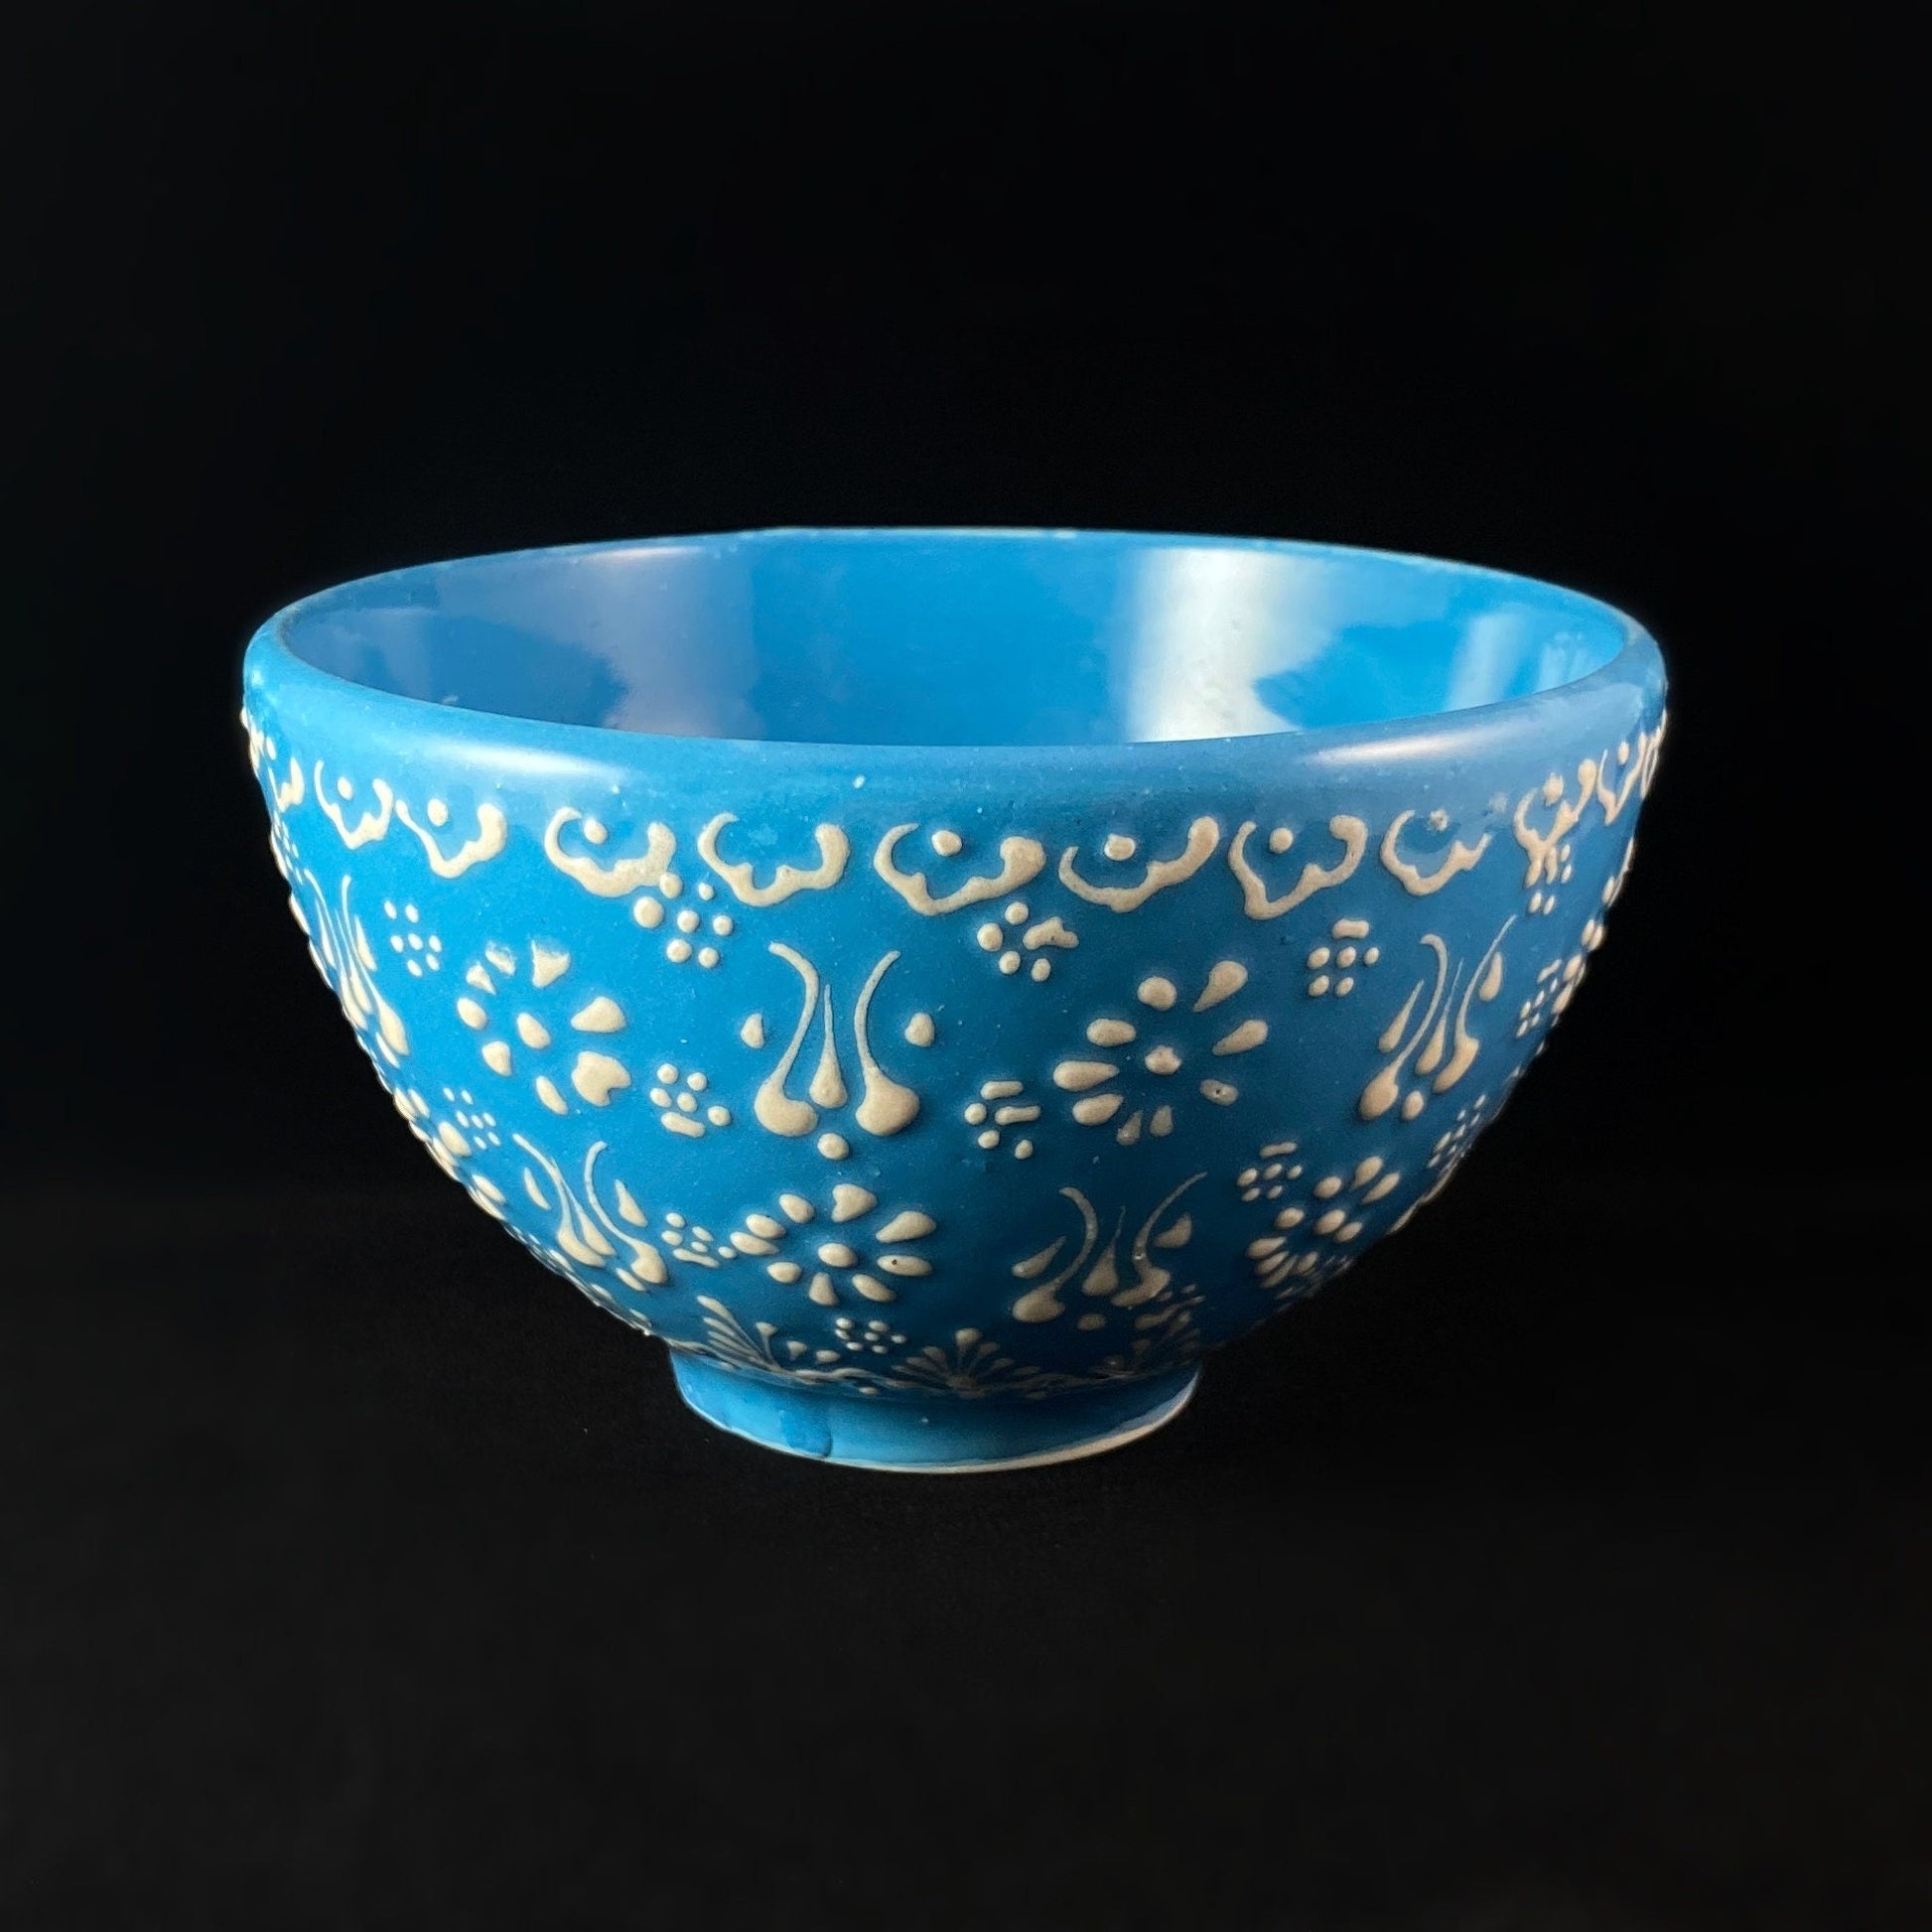 Handmade Footed Bowl, Functional and Decorative Turkish Pottery, Cottagecore Style, Blue